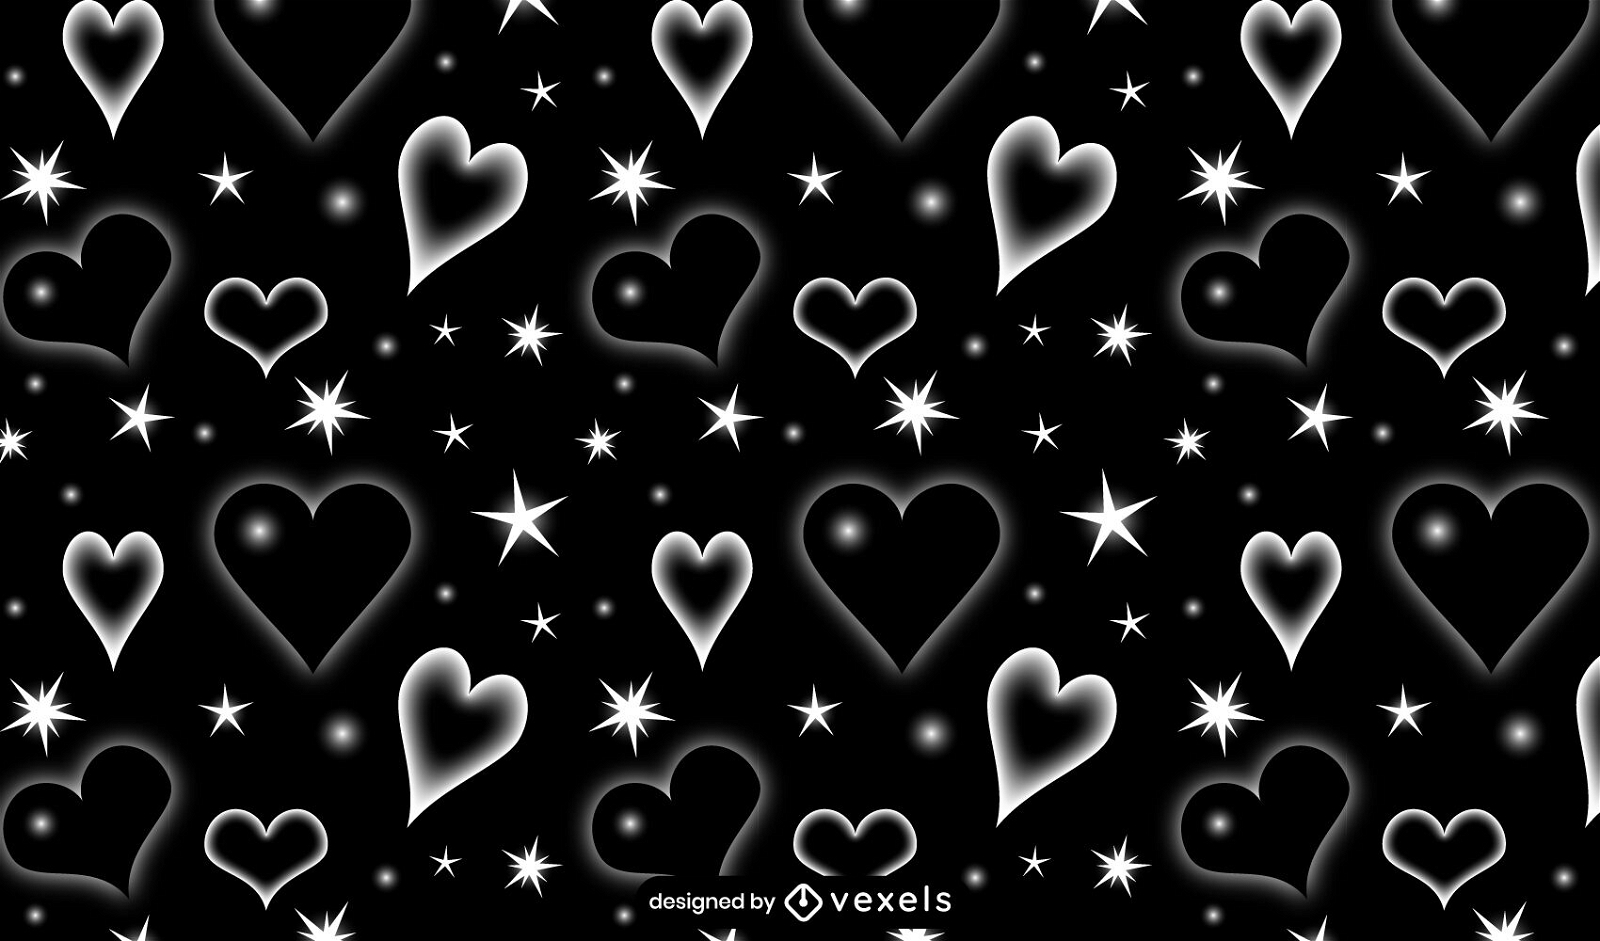 Glossy black hearts tileable pattern design